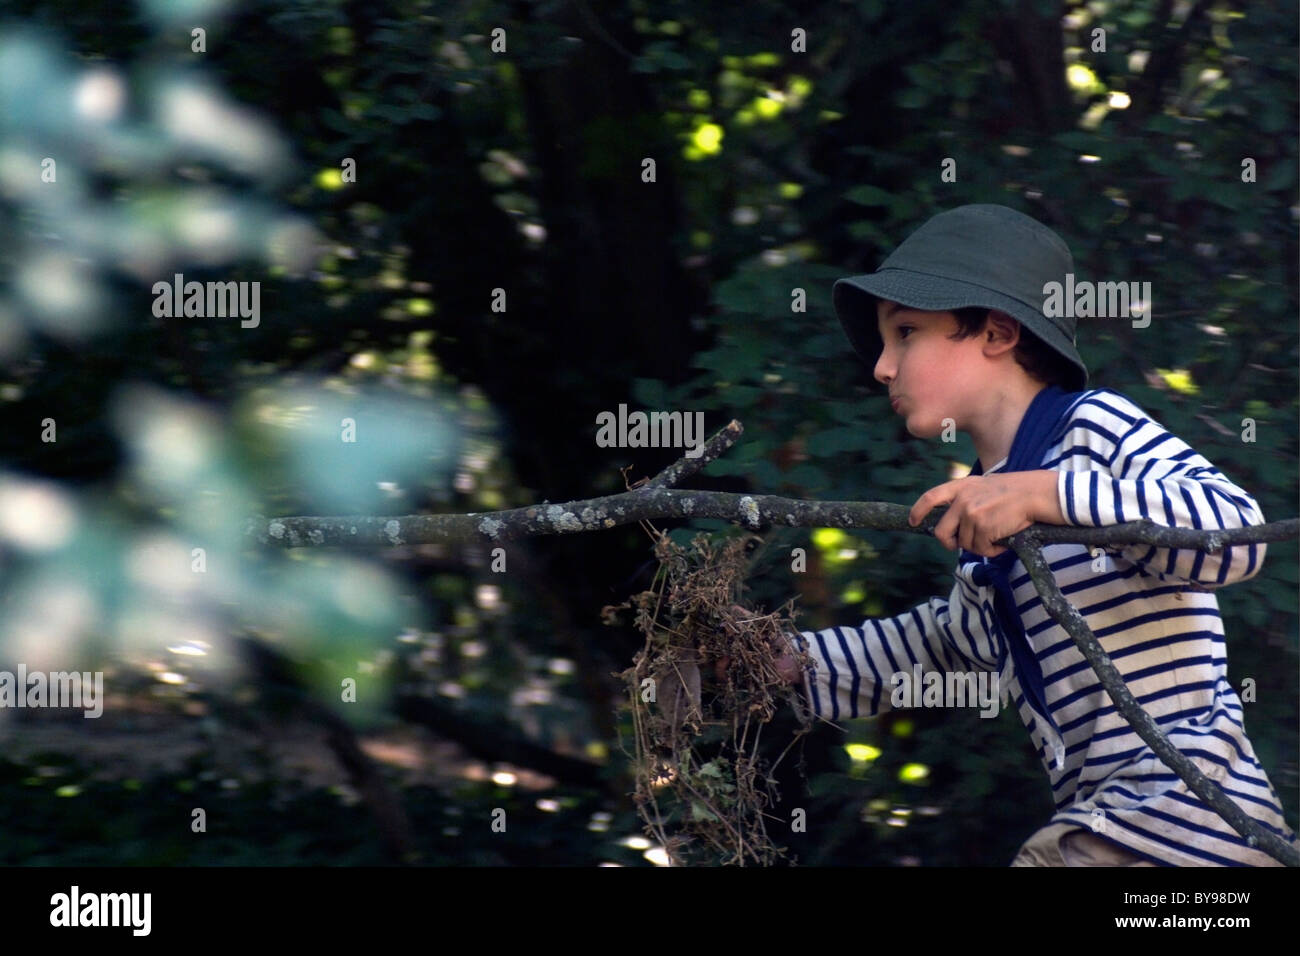 Boy running in the forest holding a tree branch, Provence, France. Stock Photo